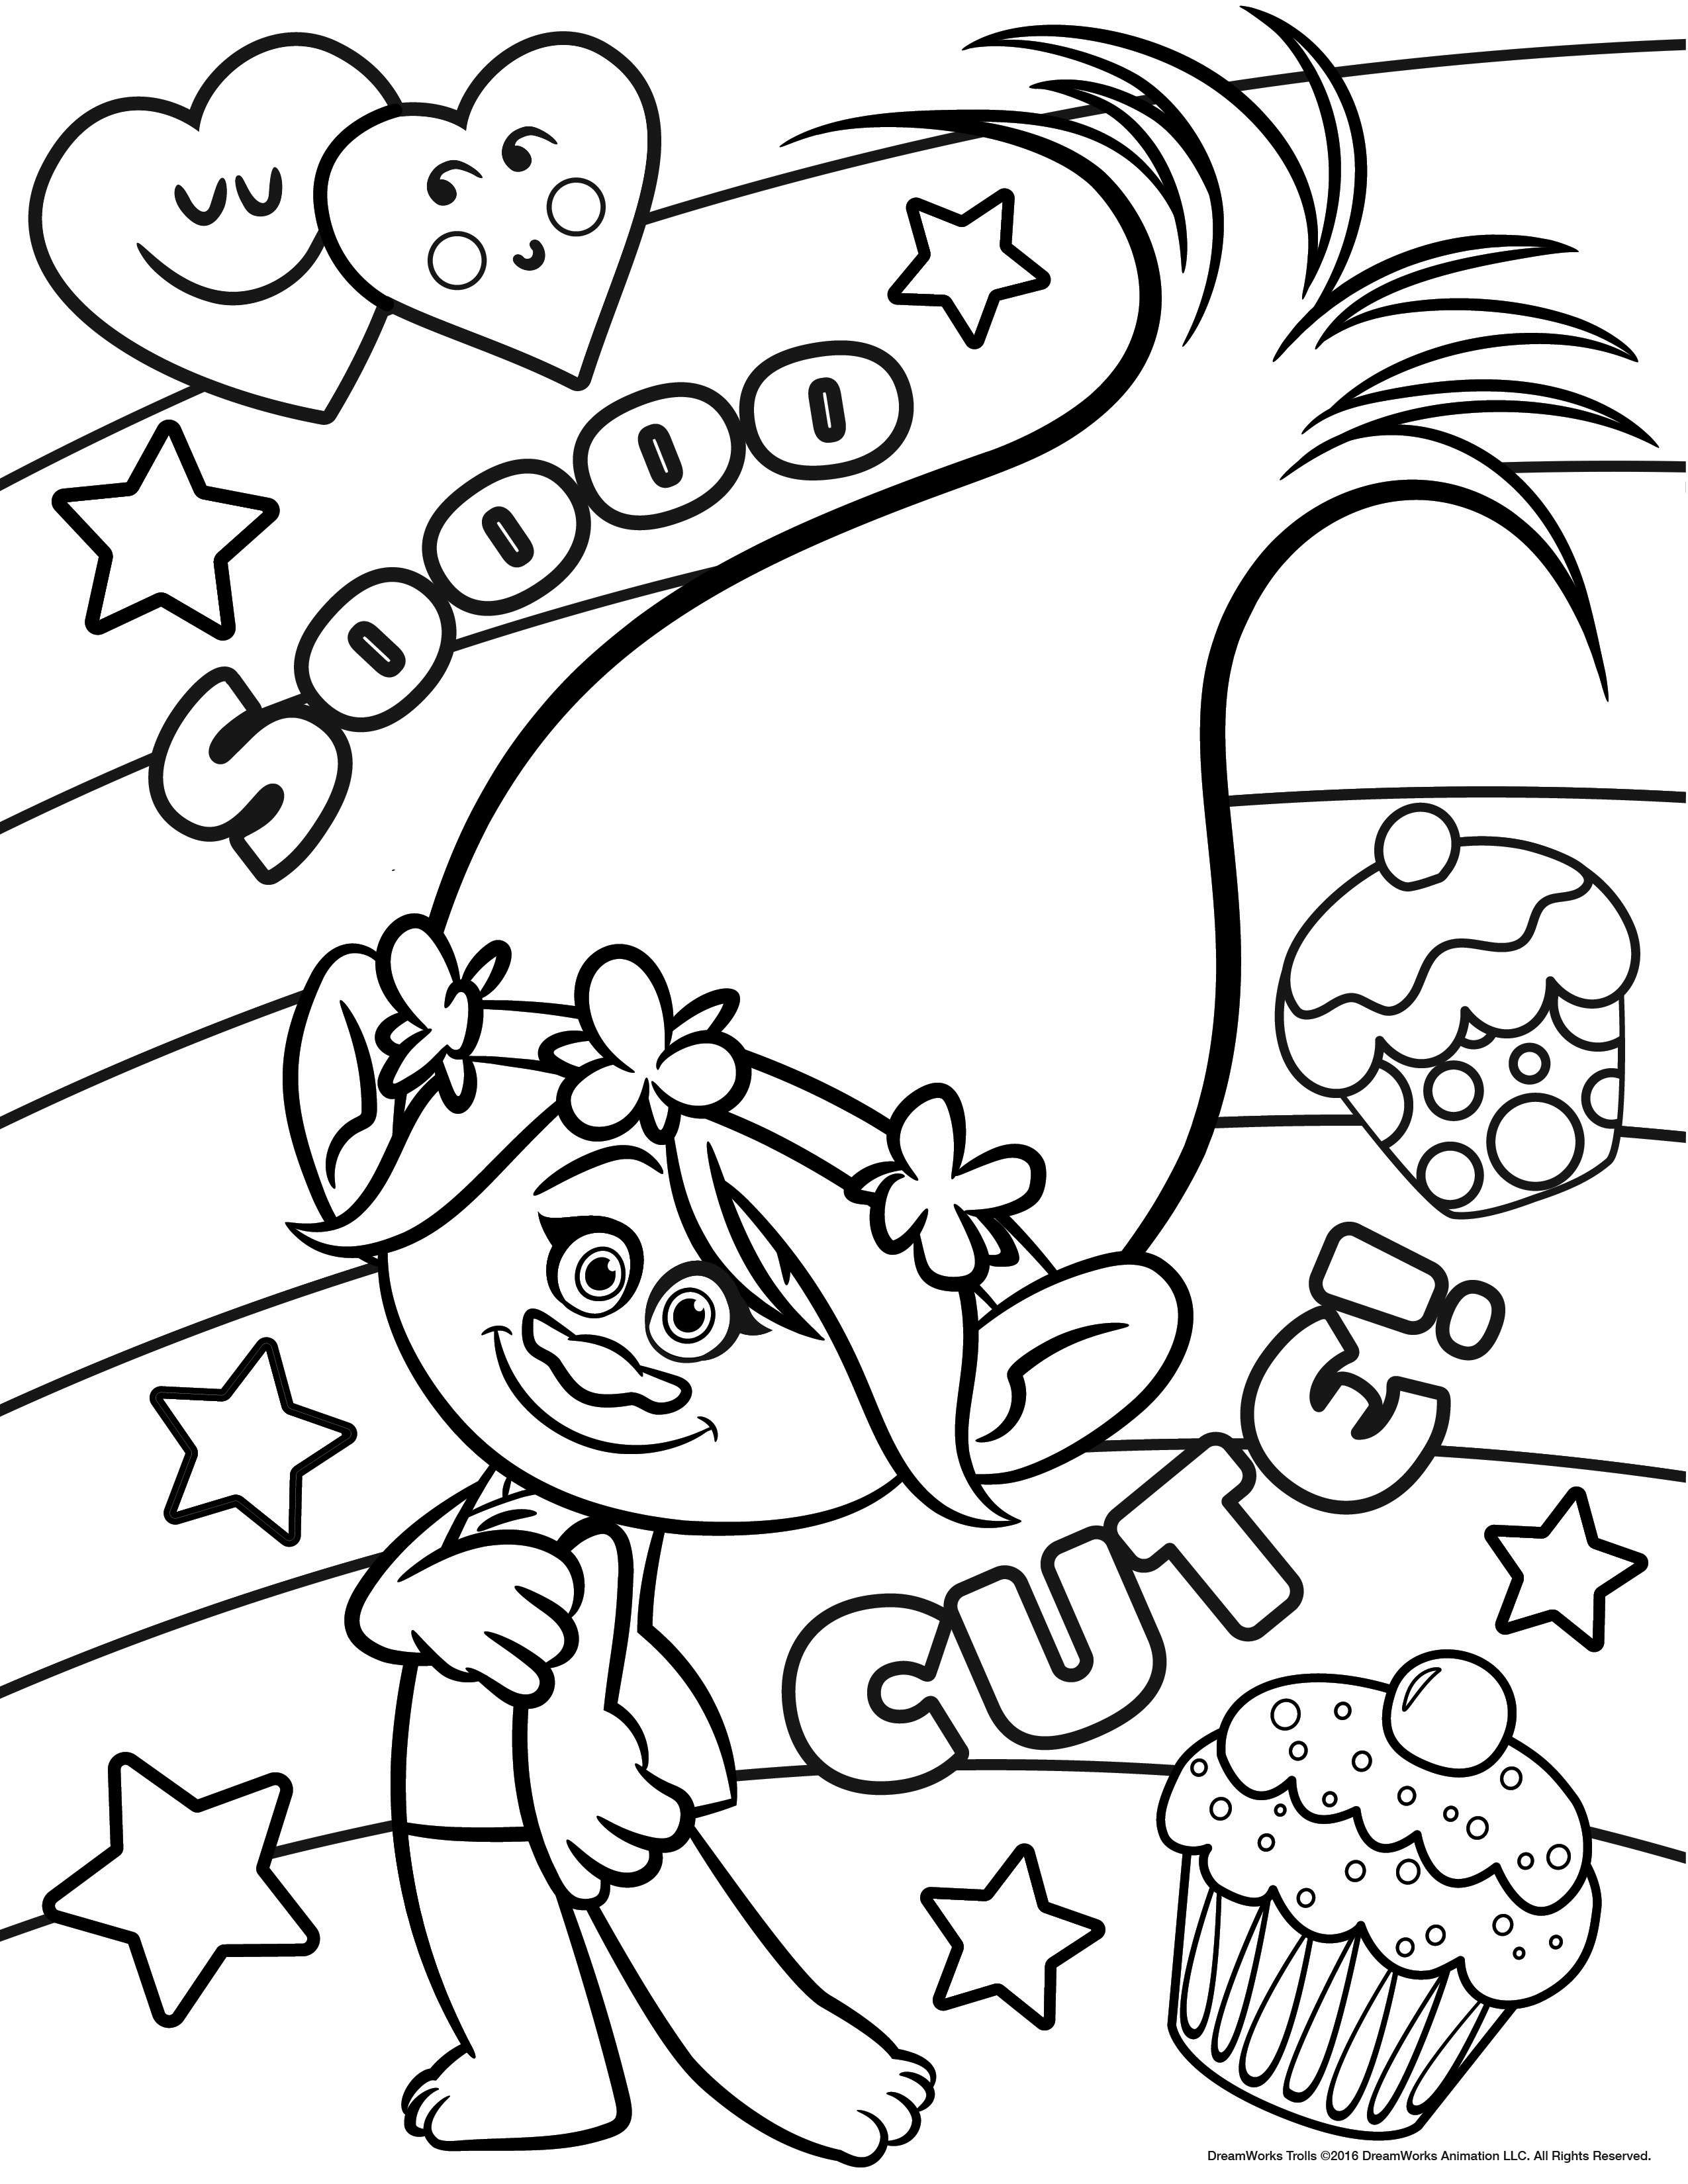 Trolls to print for free - Trolls Kids Coloring Pages